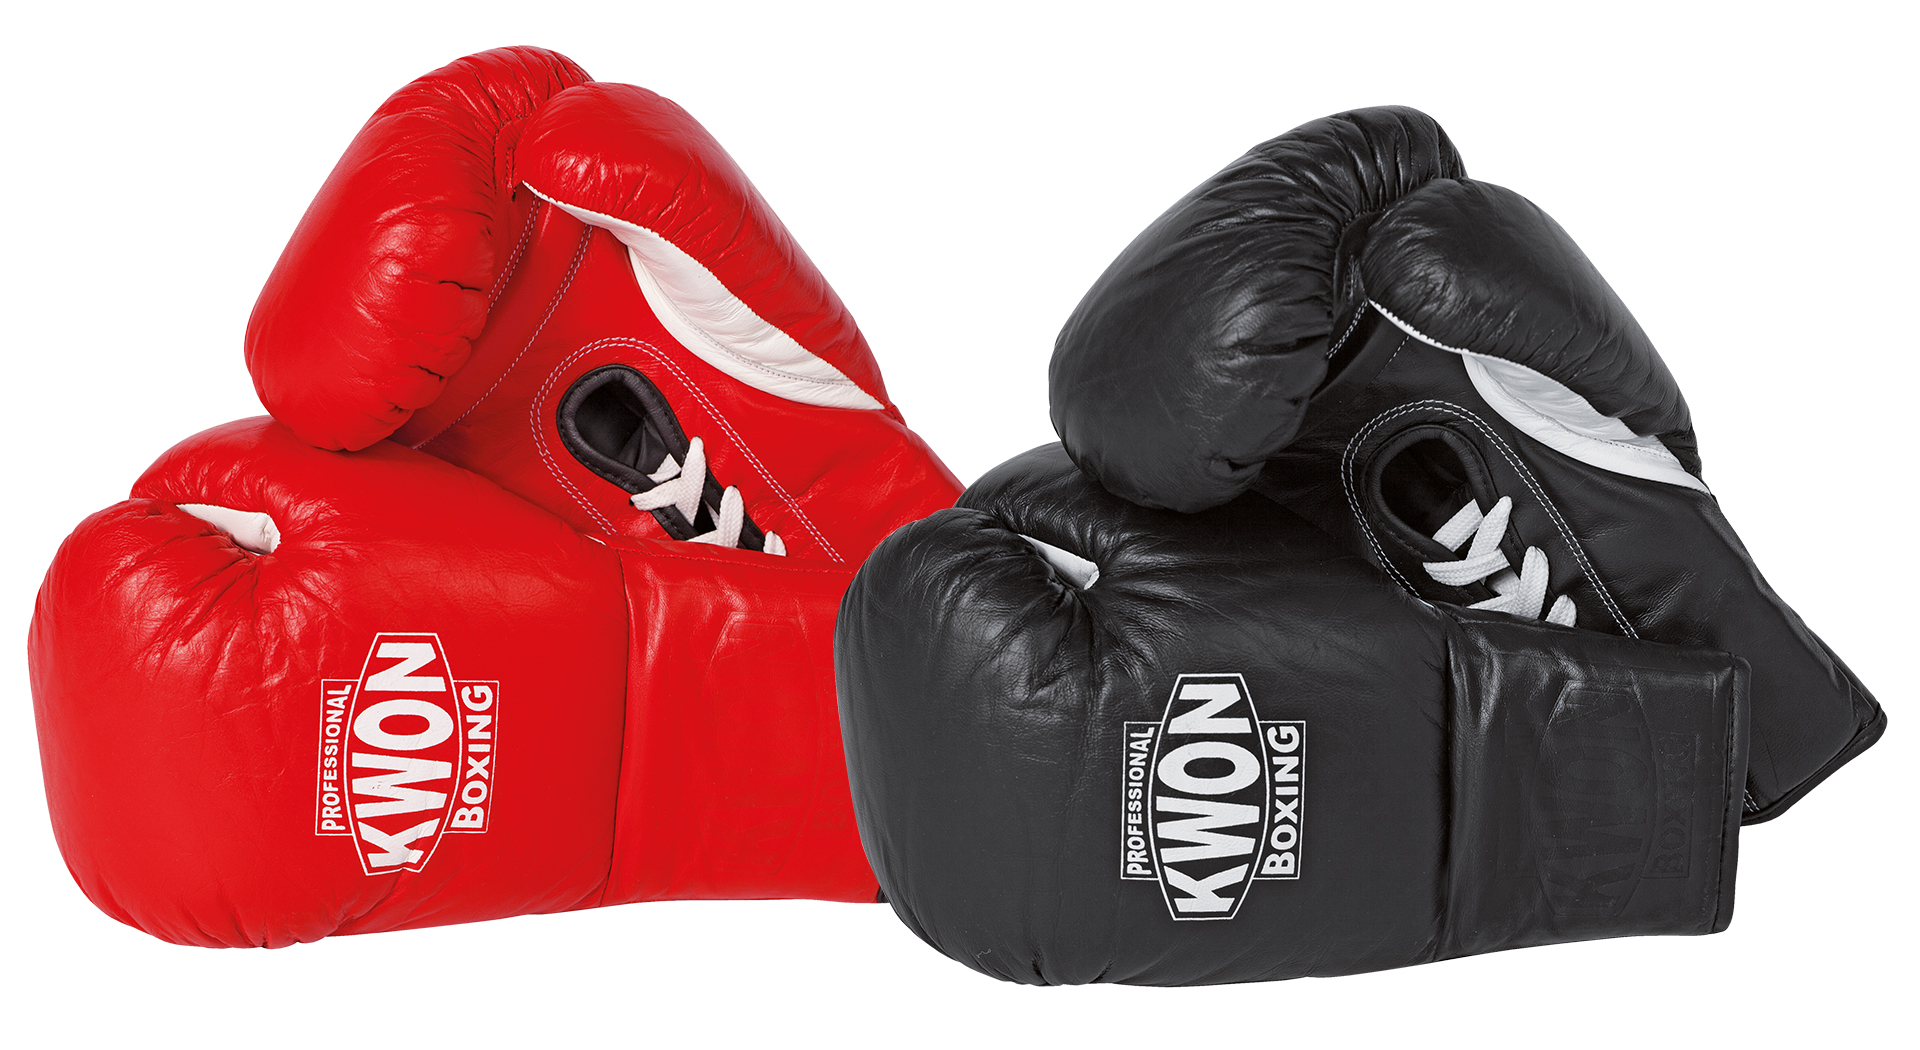 KWON PROFESSIONAL BOXING Gloves Leather with laces for competitions